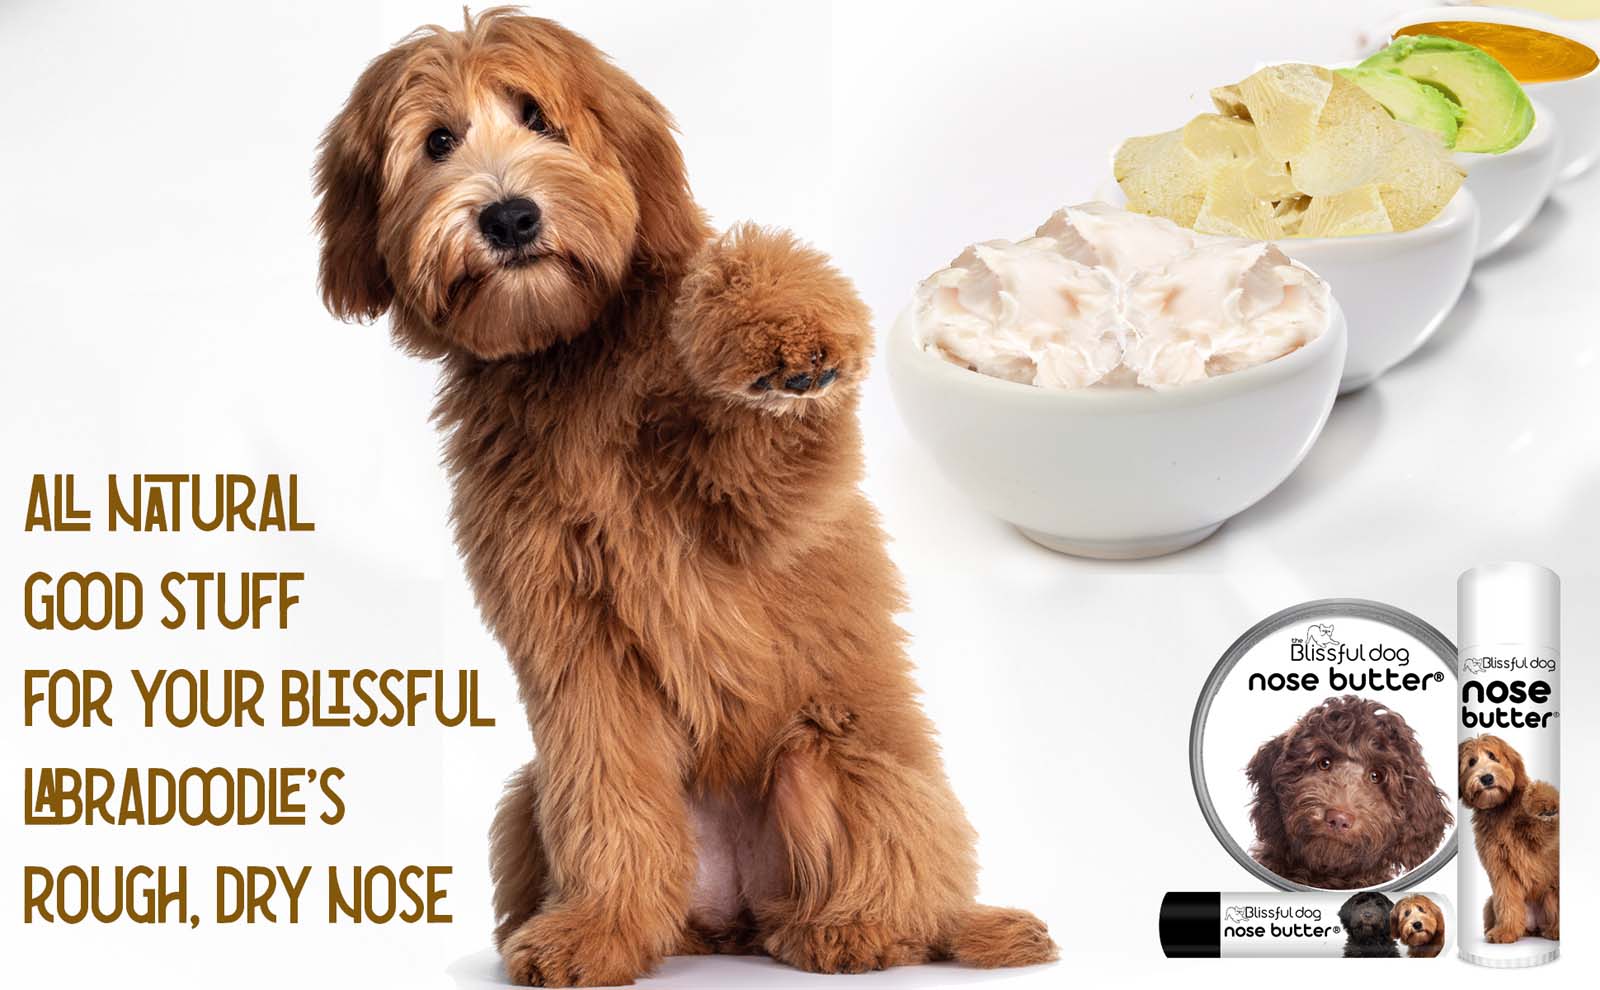 Labradoodle has dry nose